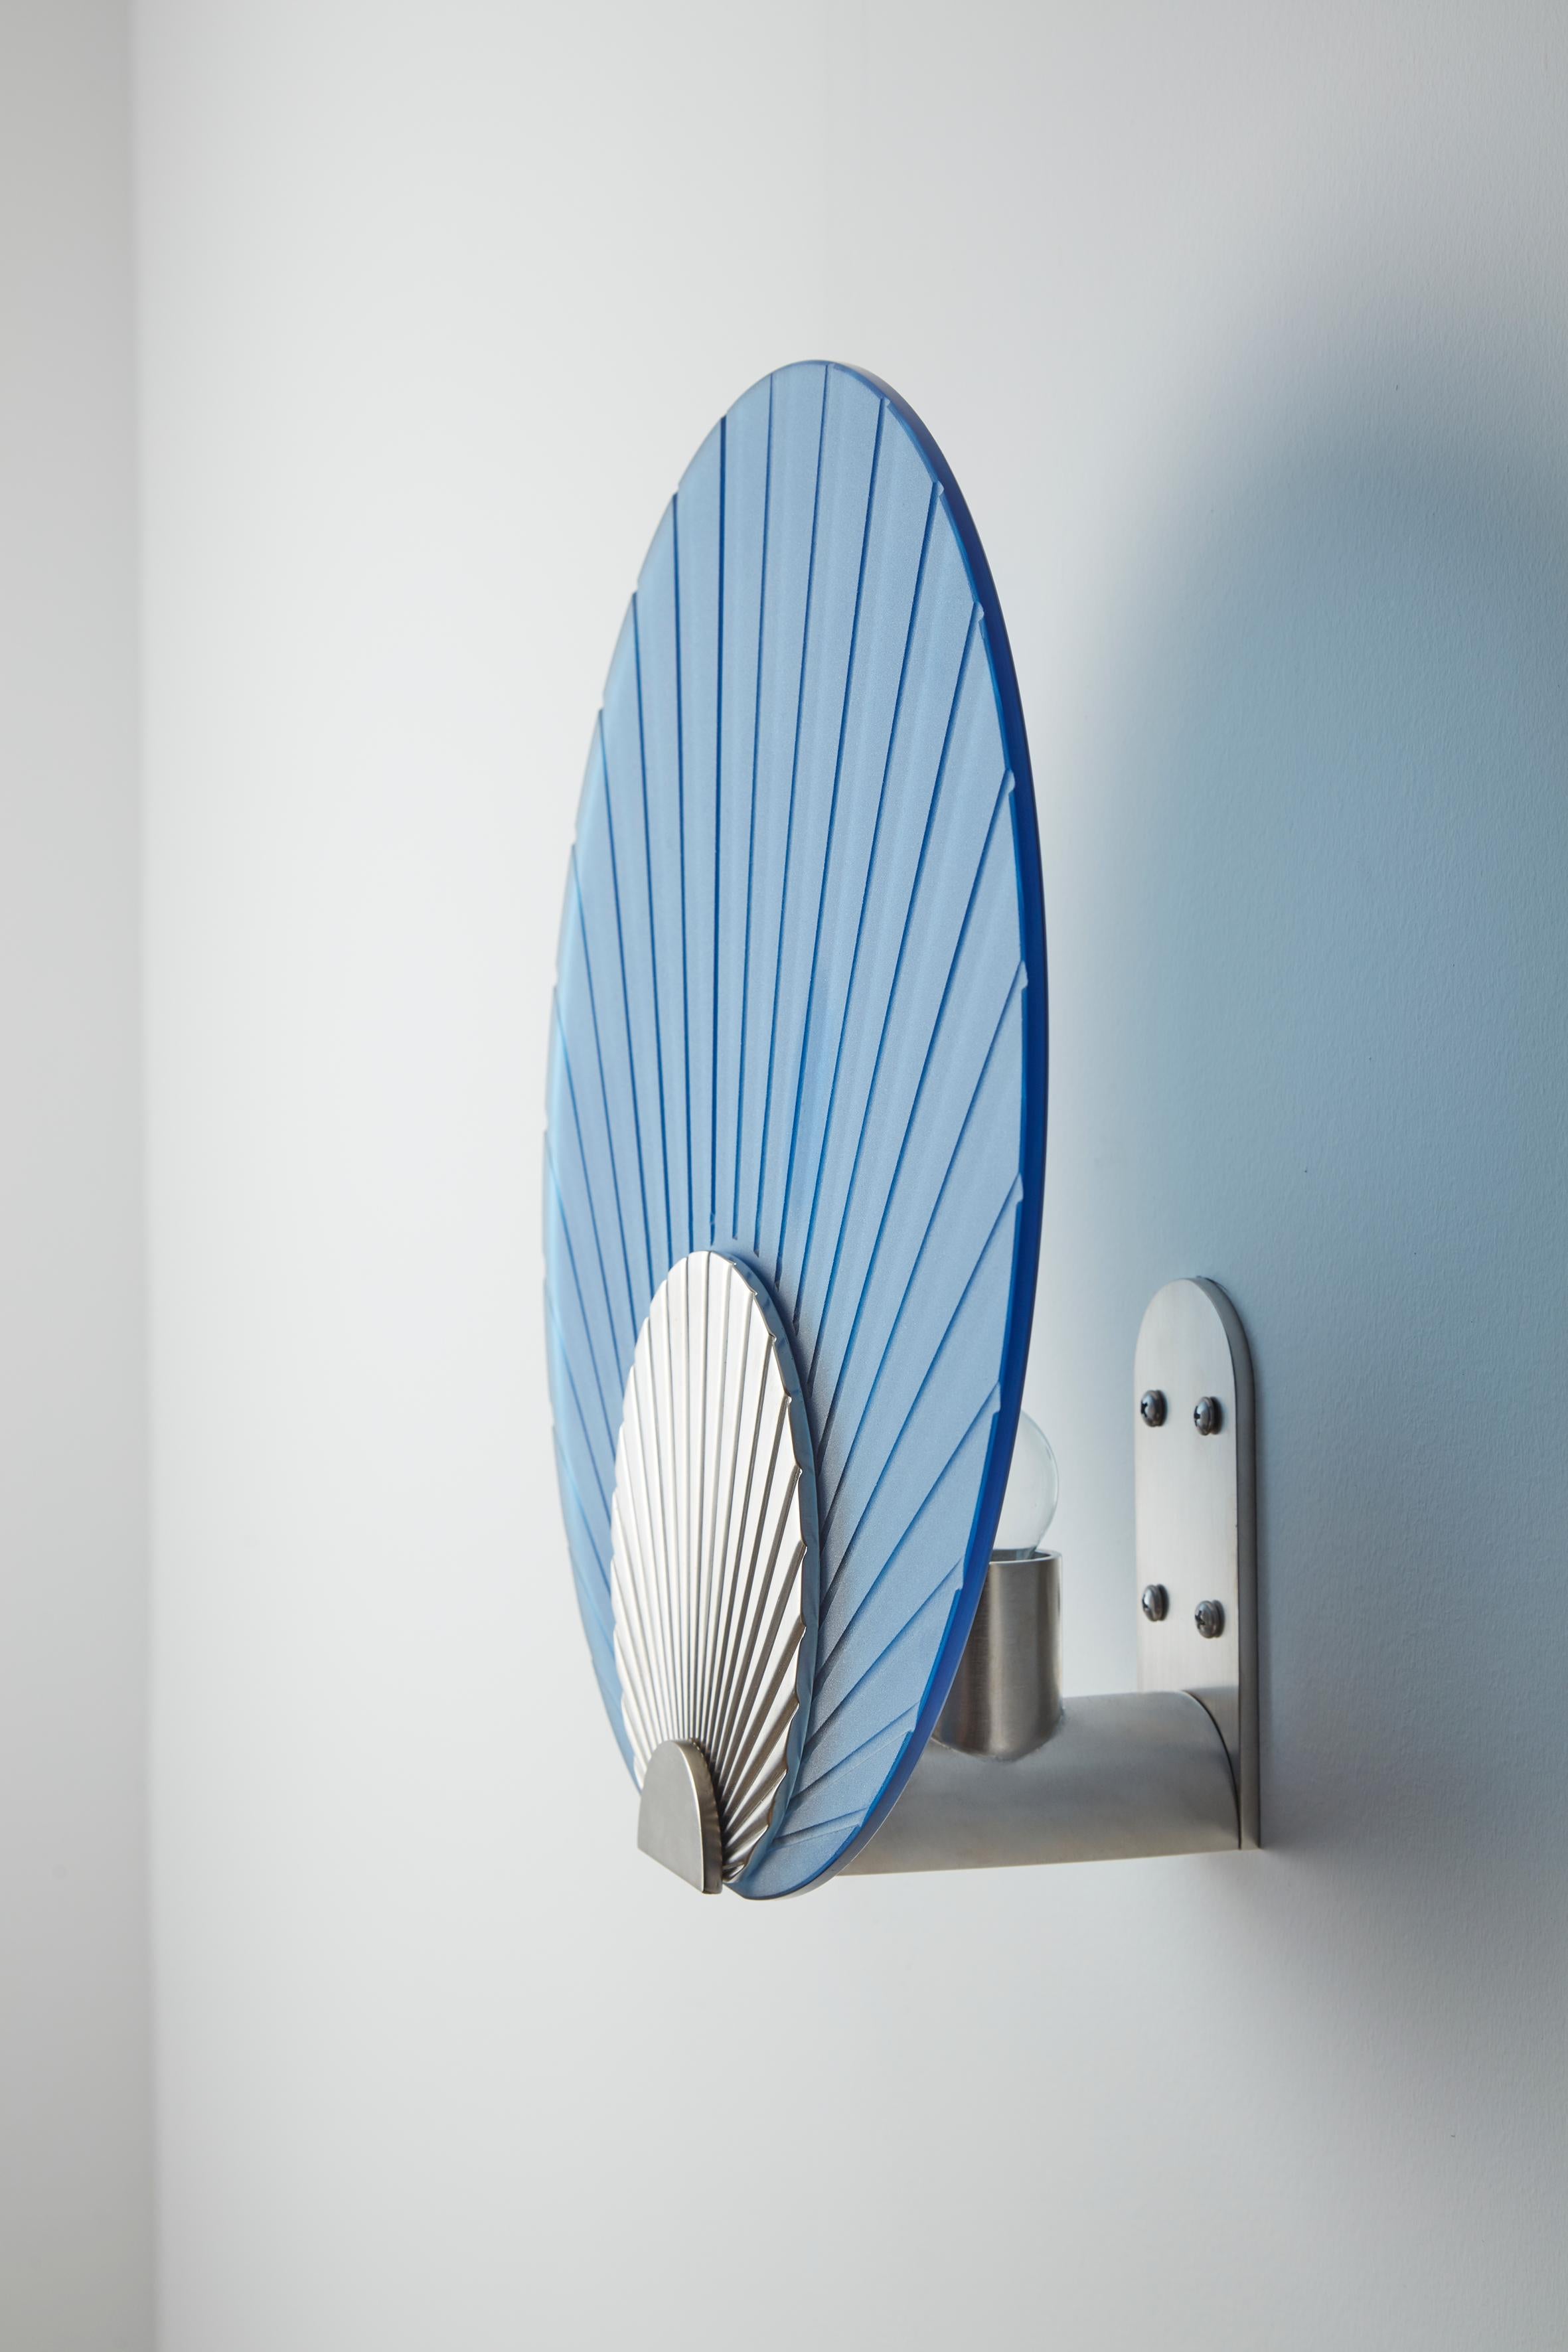 Maiko wall mounted nickel and blue, Carla Baz
Dimensions: ø 35 x D 14 cm
Weight: 3.5 kg
Material: Nickel

Maiko lighting pieces are inspired by the beautiful Japanese folding fans held by geishas and maikos during their notorious dances. These